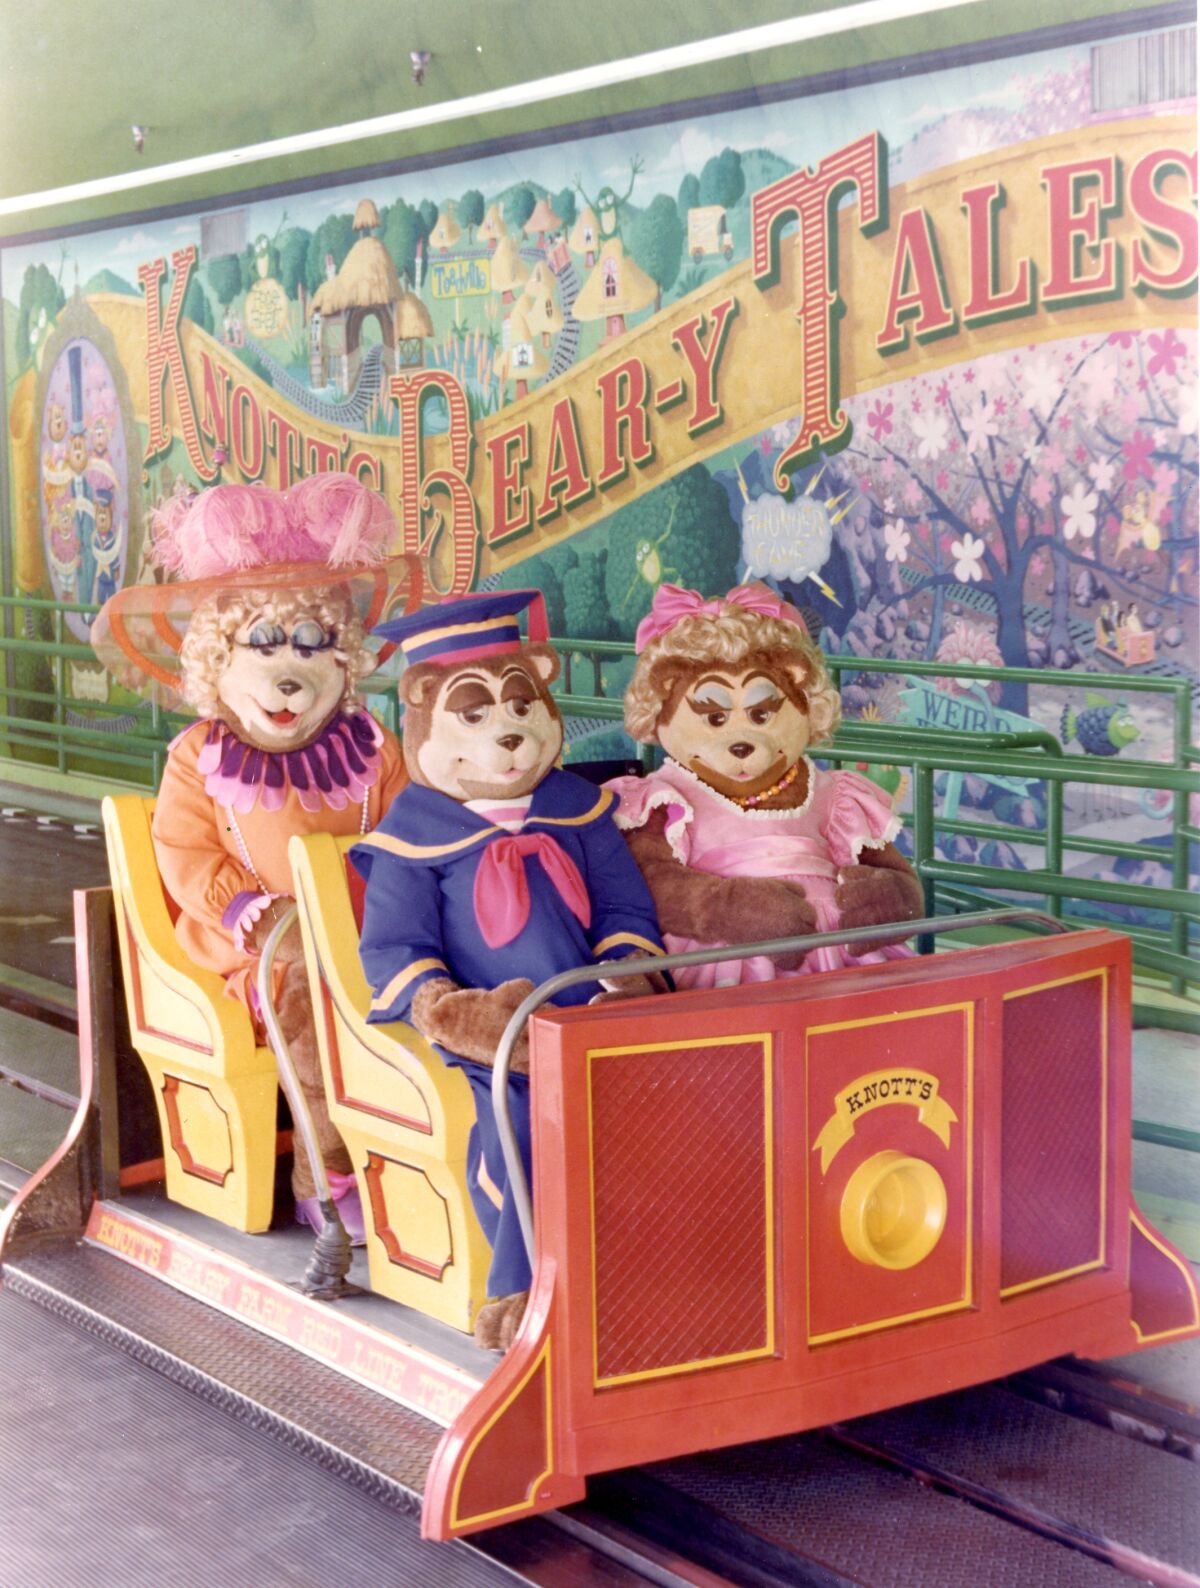 Characters on the original Bear-y Tales ride at Knott's Berry Farm.